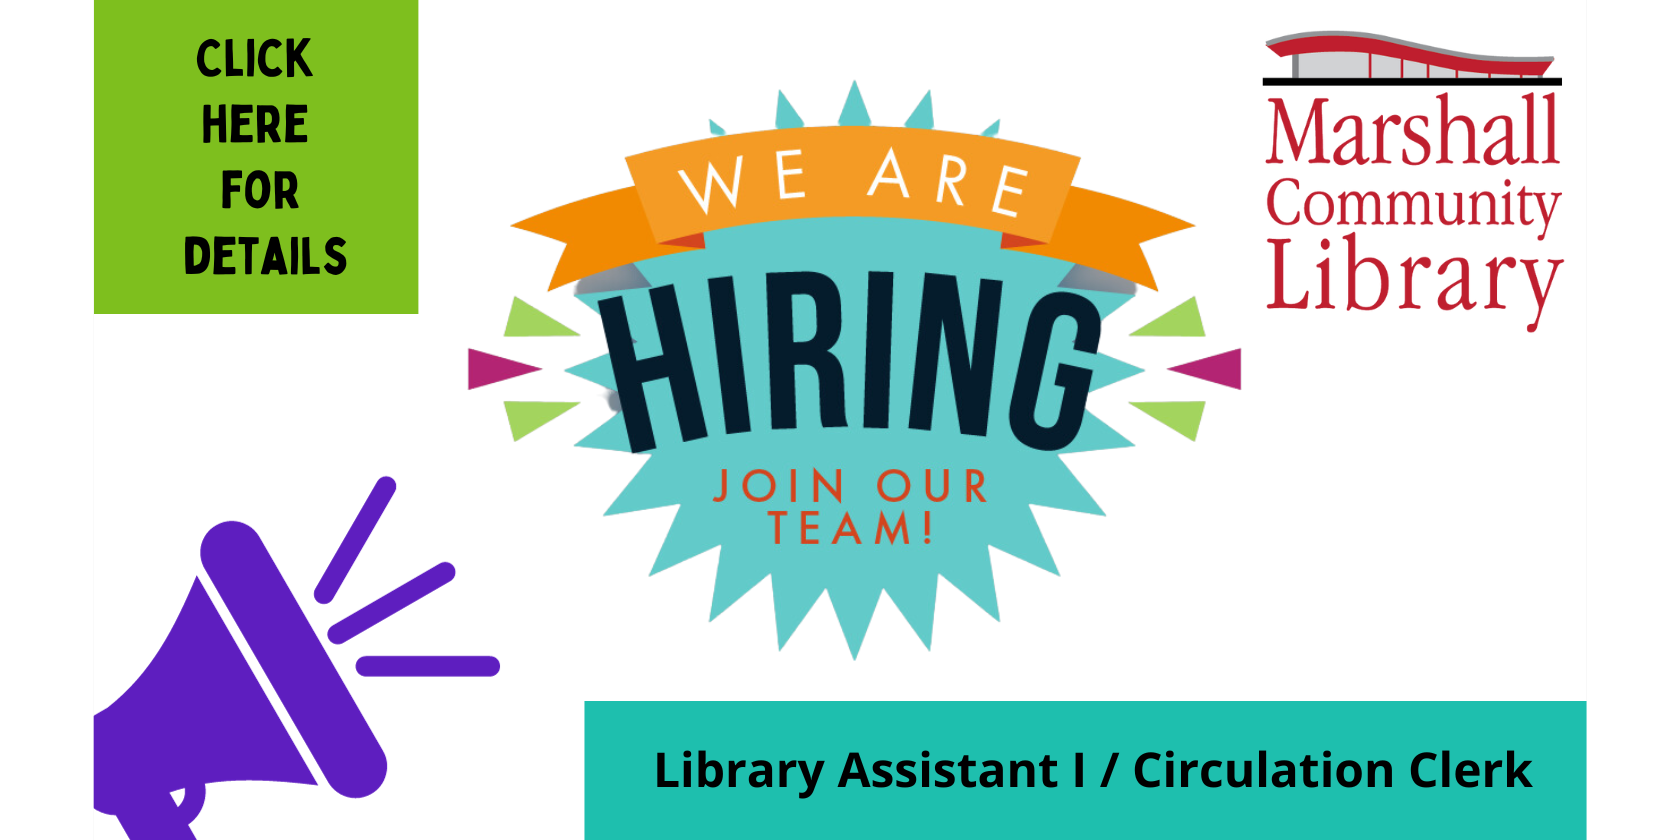 We're Hiring Library Assistant 1